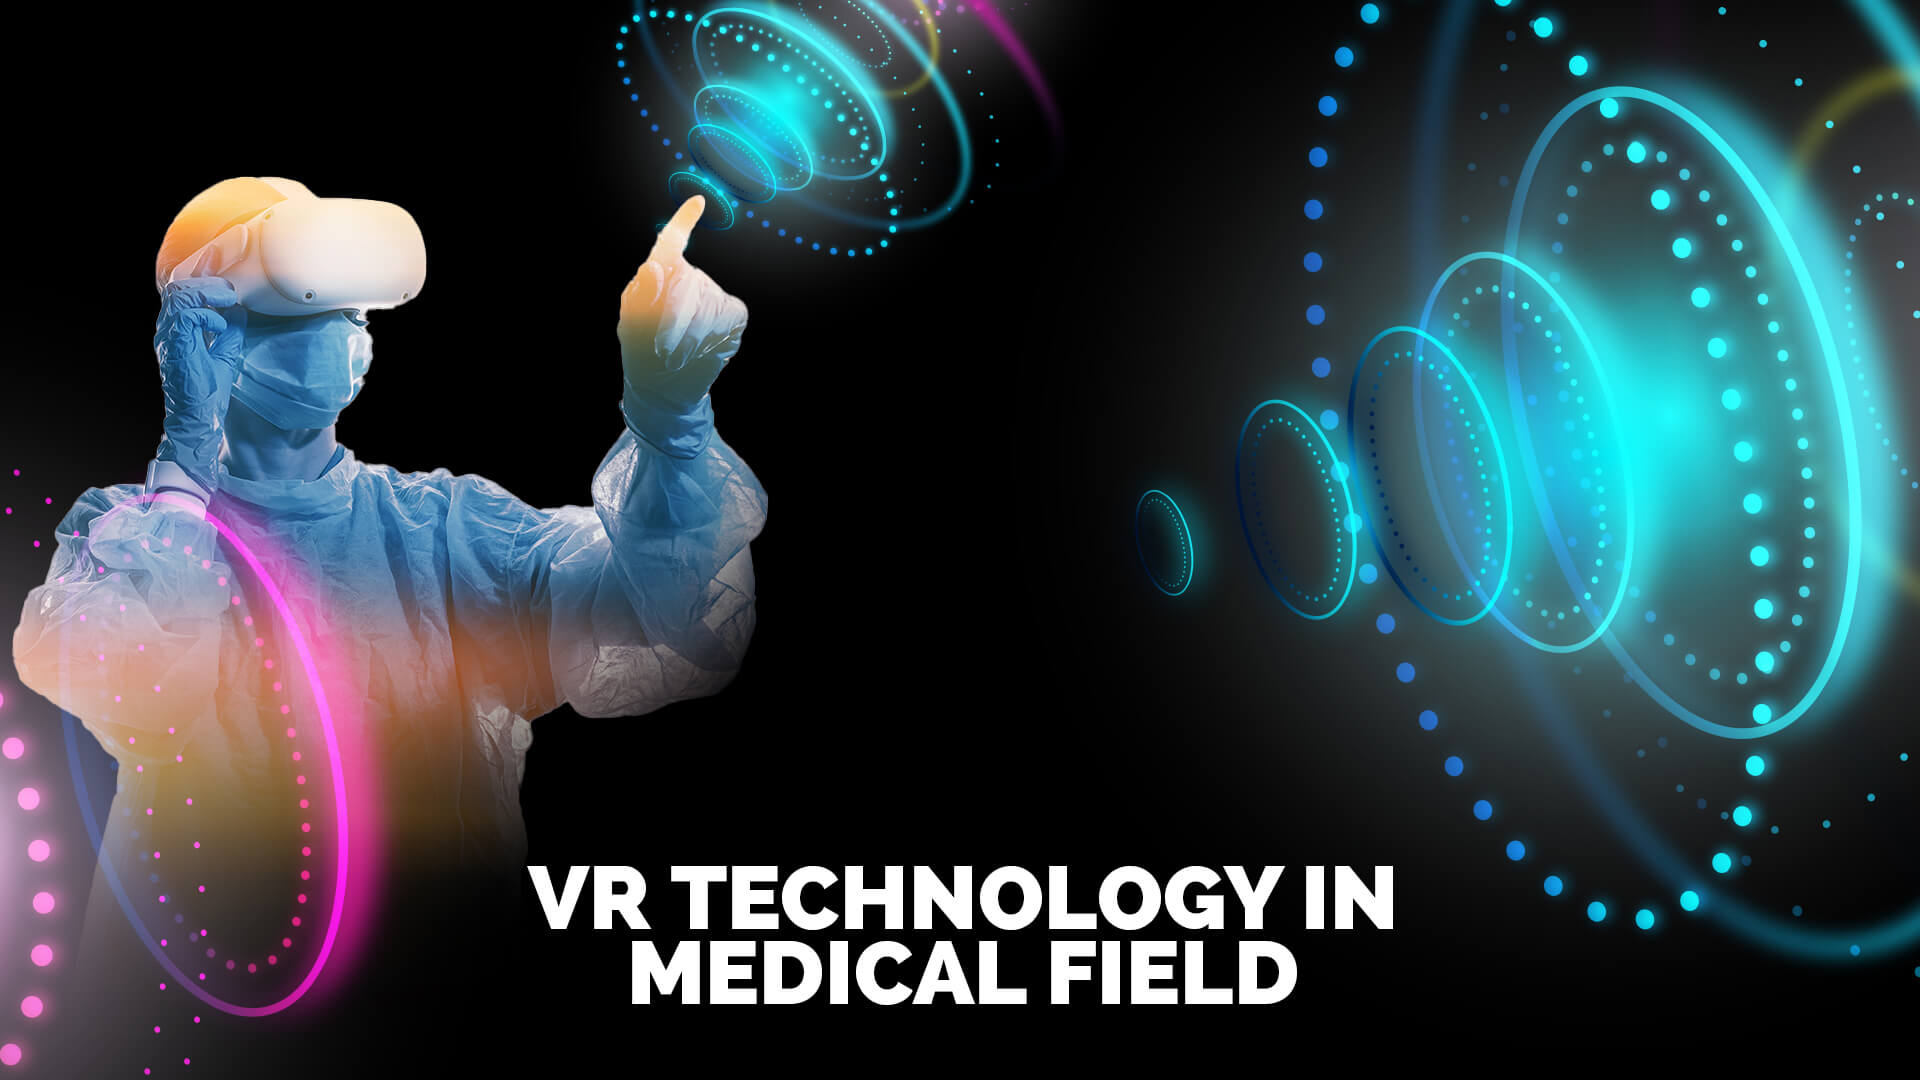 Vr Technologies in medical field